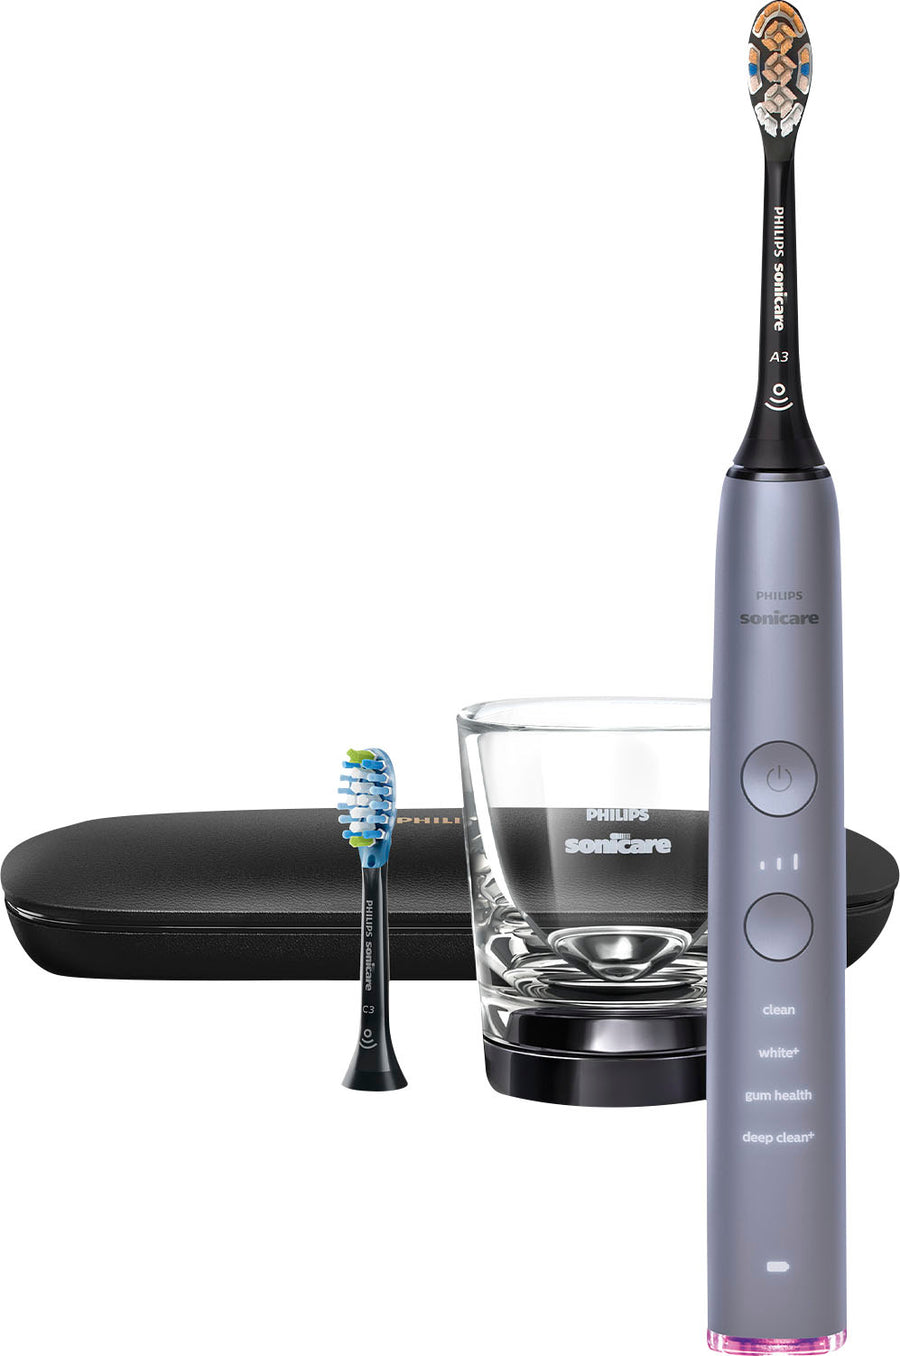 Philips Sonicare DiamondClean Smart Electric, Rechargeable Toothbrush for Complete Oral Care – 9300 Series - Grey_0